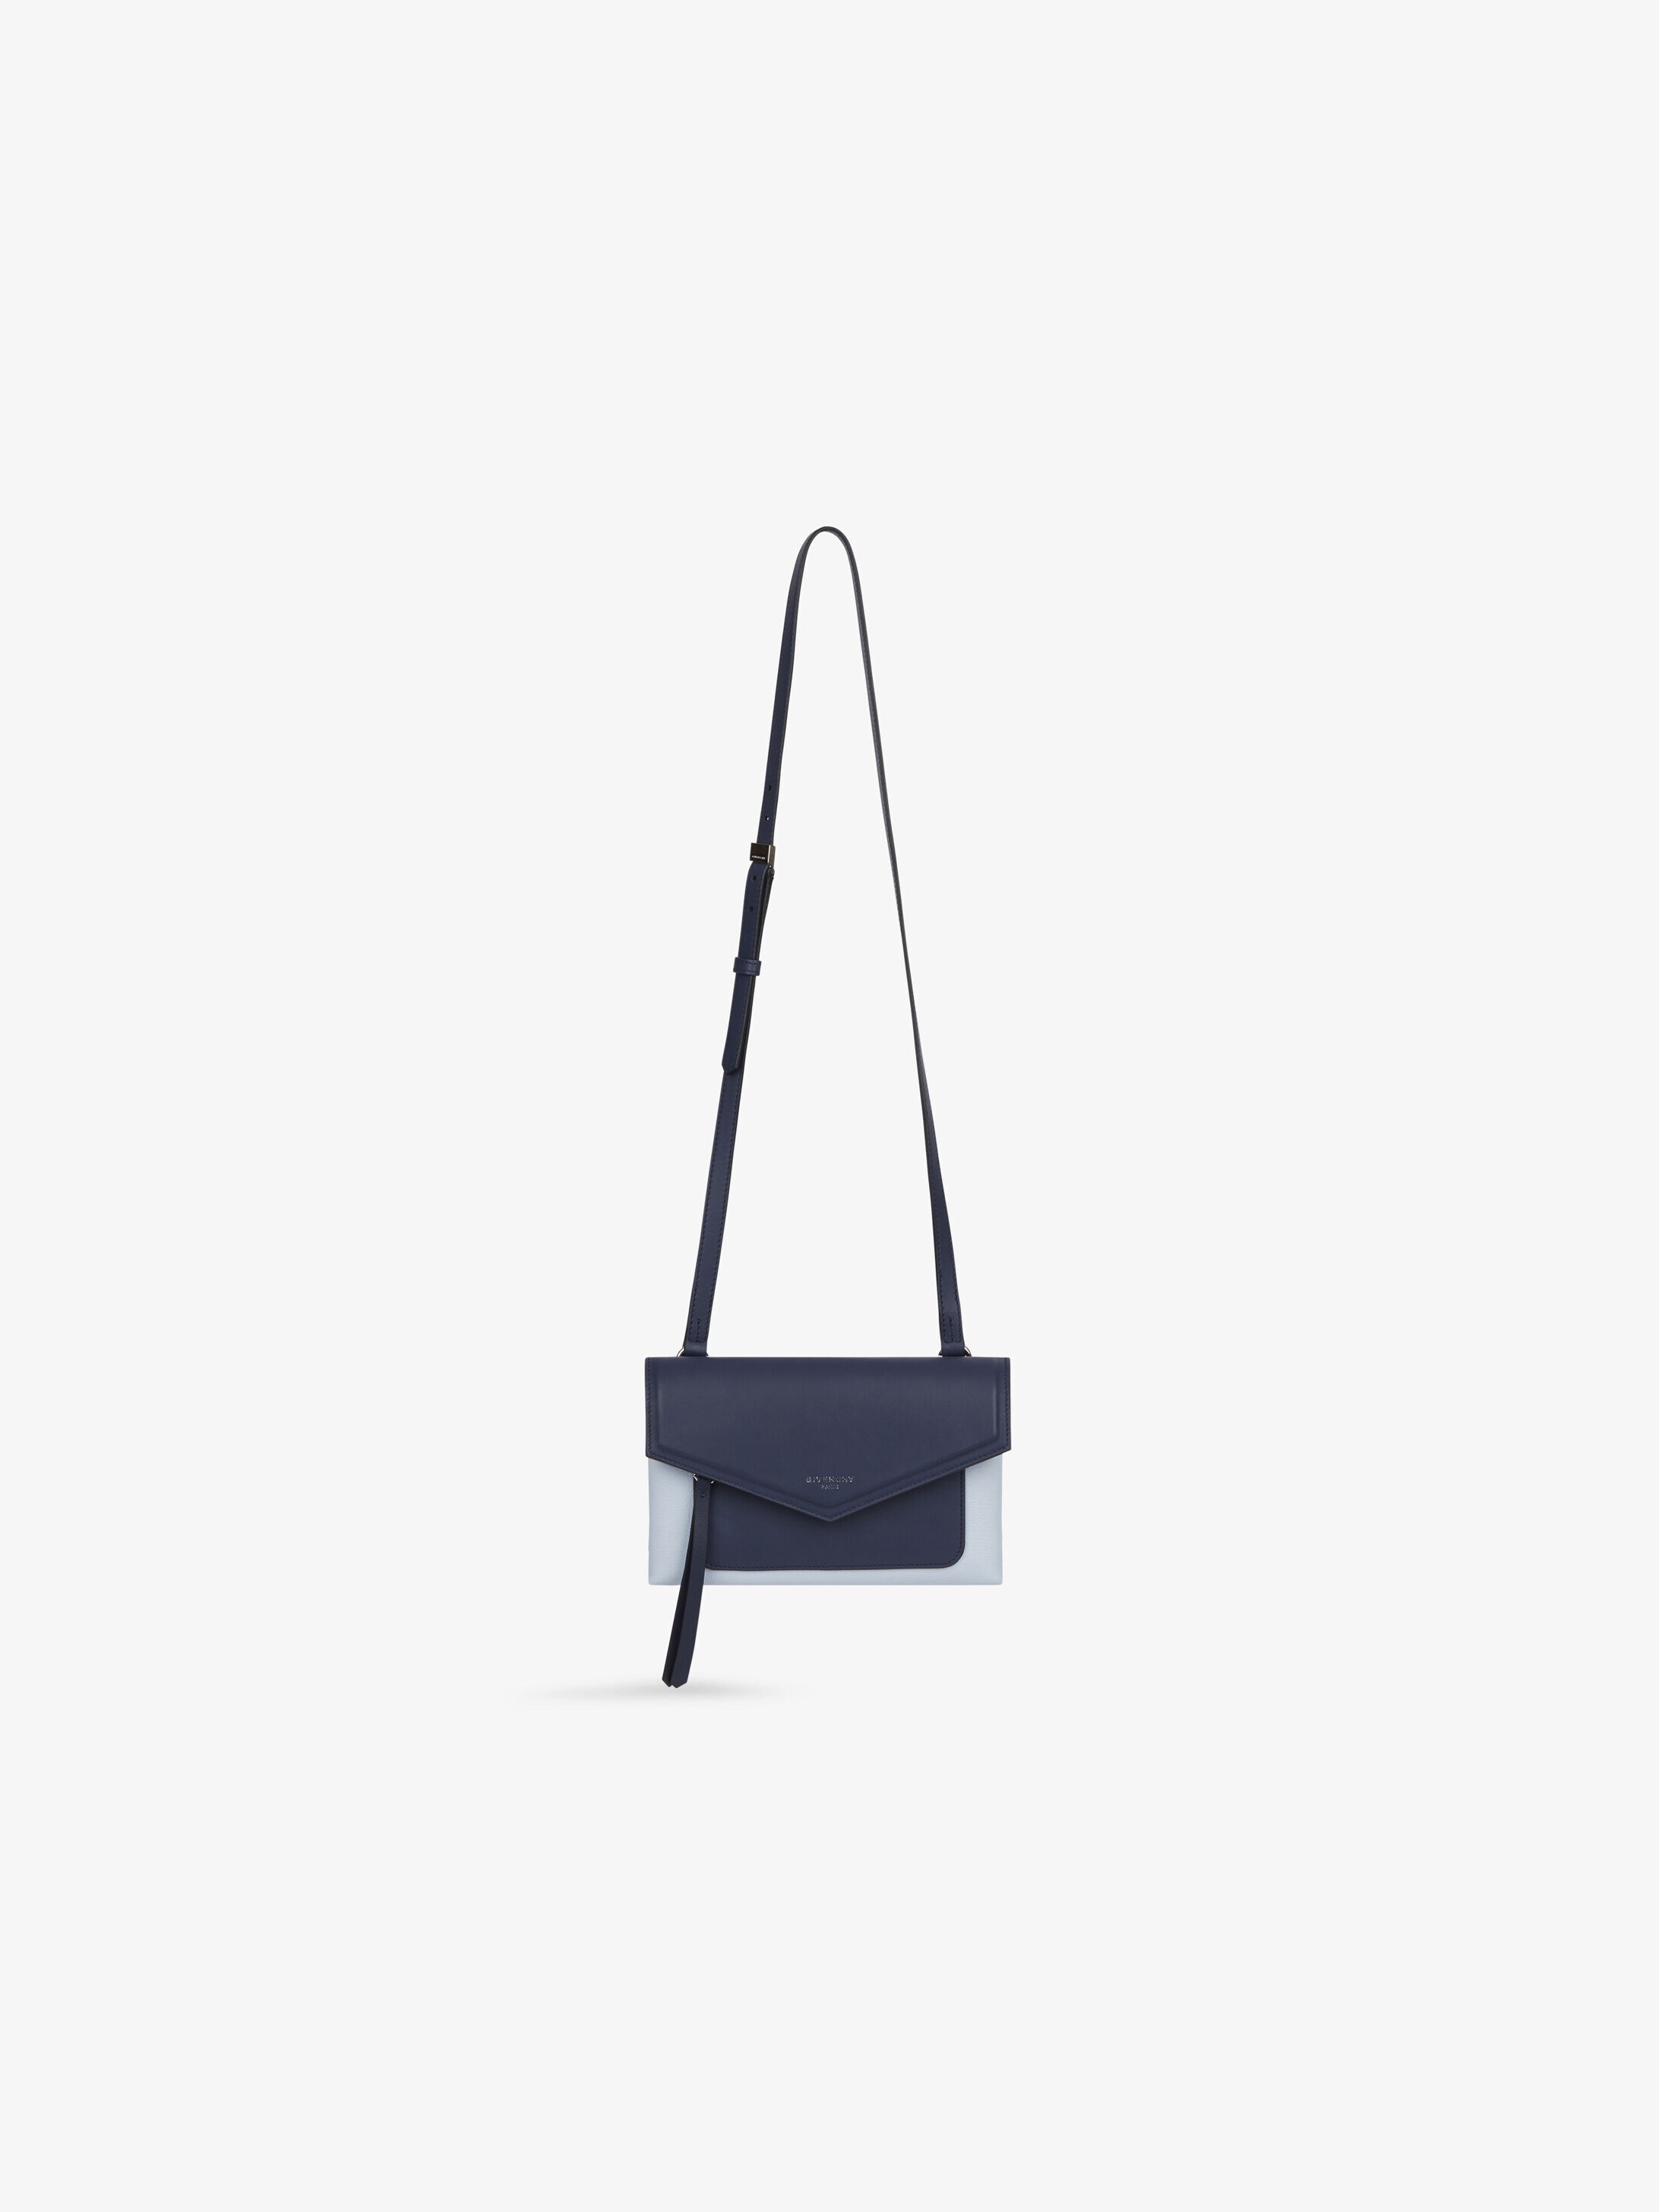 Givenchy Duetto Crossbody Bag Greece, SAVE 40% - aveclumiere.com